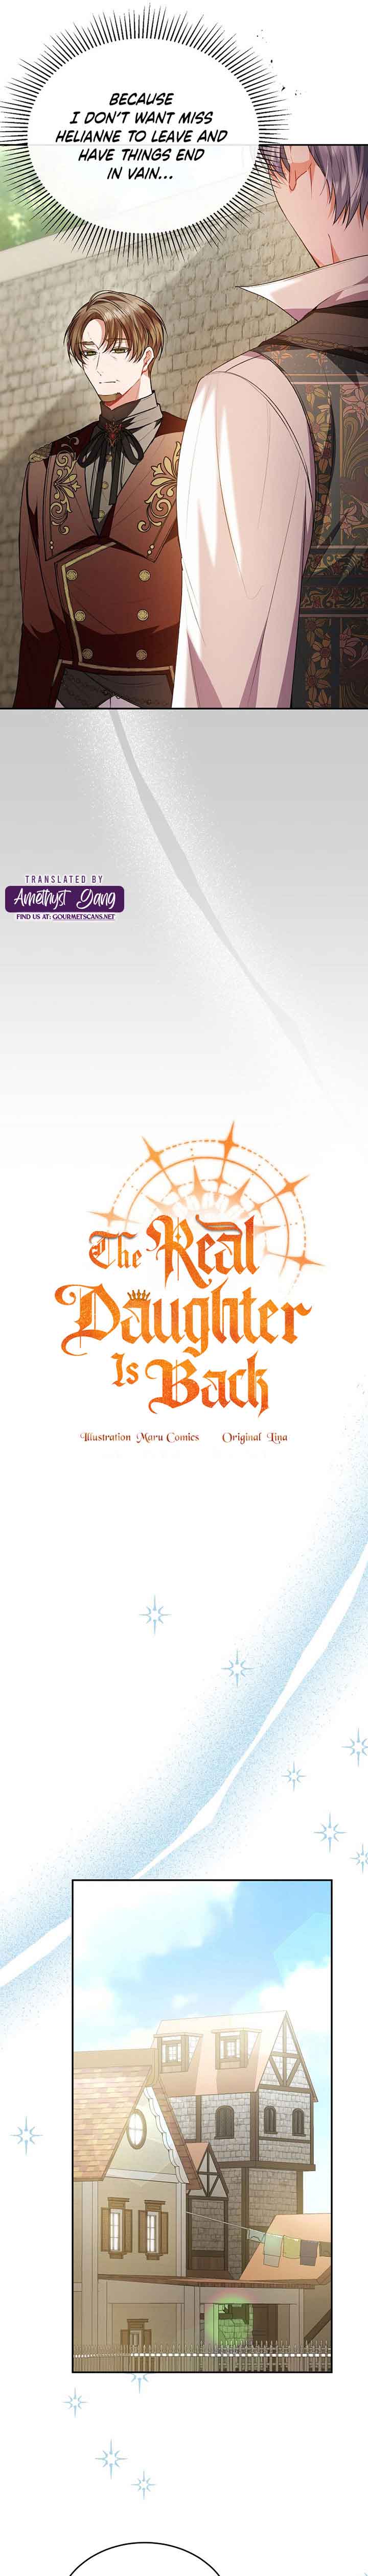 The Real Daughter Is Back - 65 page 14-4a810b3e